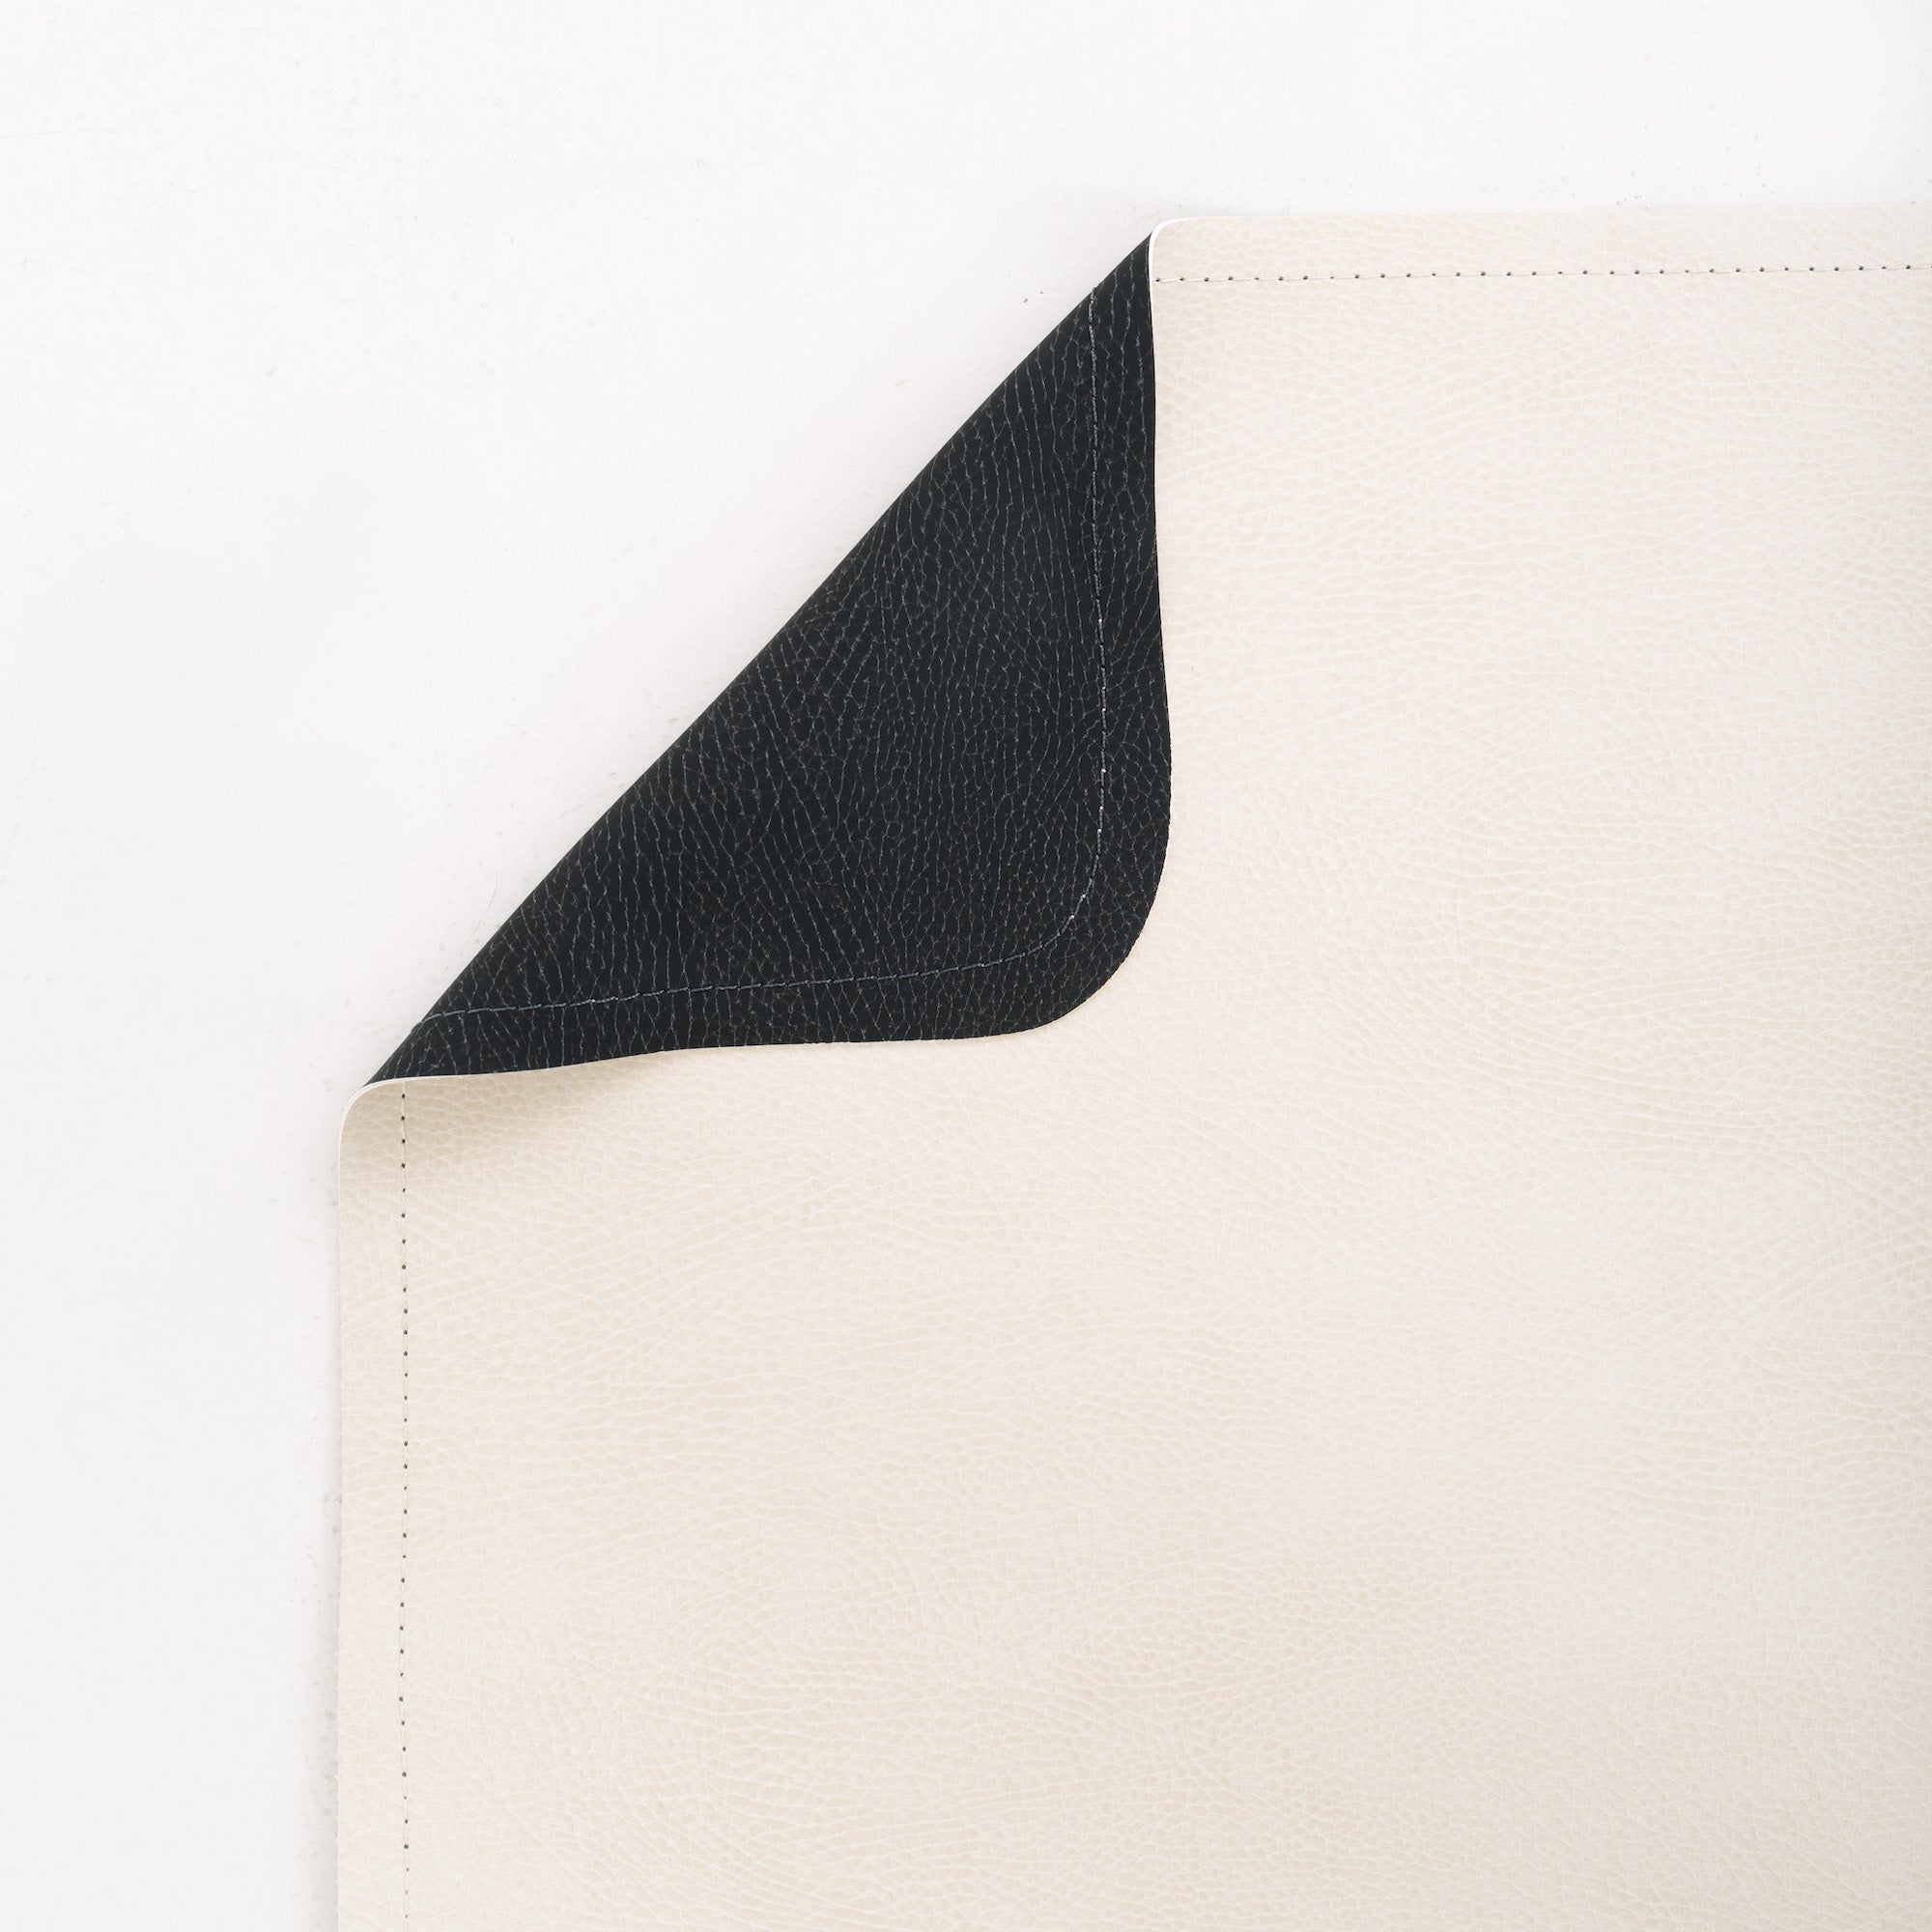 Ivory • Raven (on sale) / Square@Hanging tab of the ivory/raven midi mat  